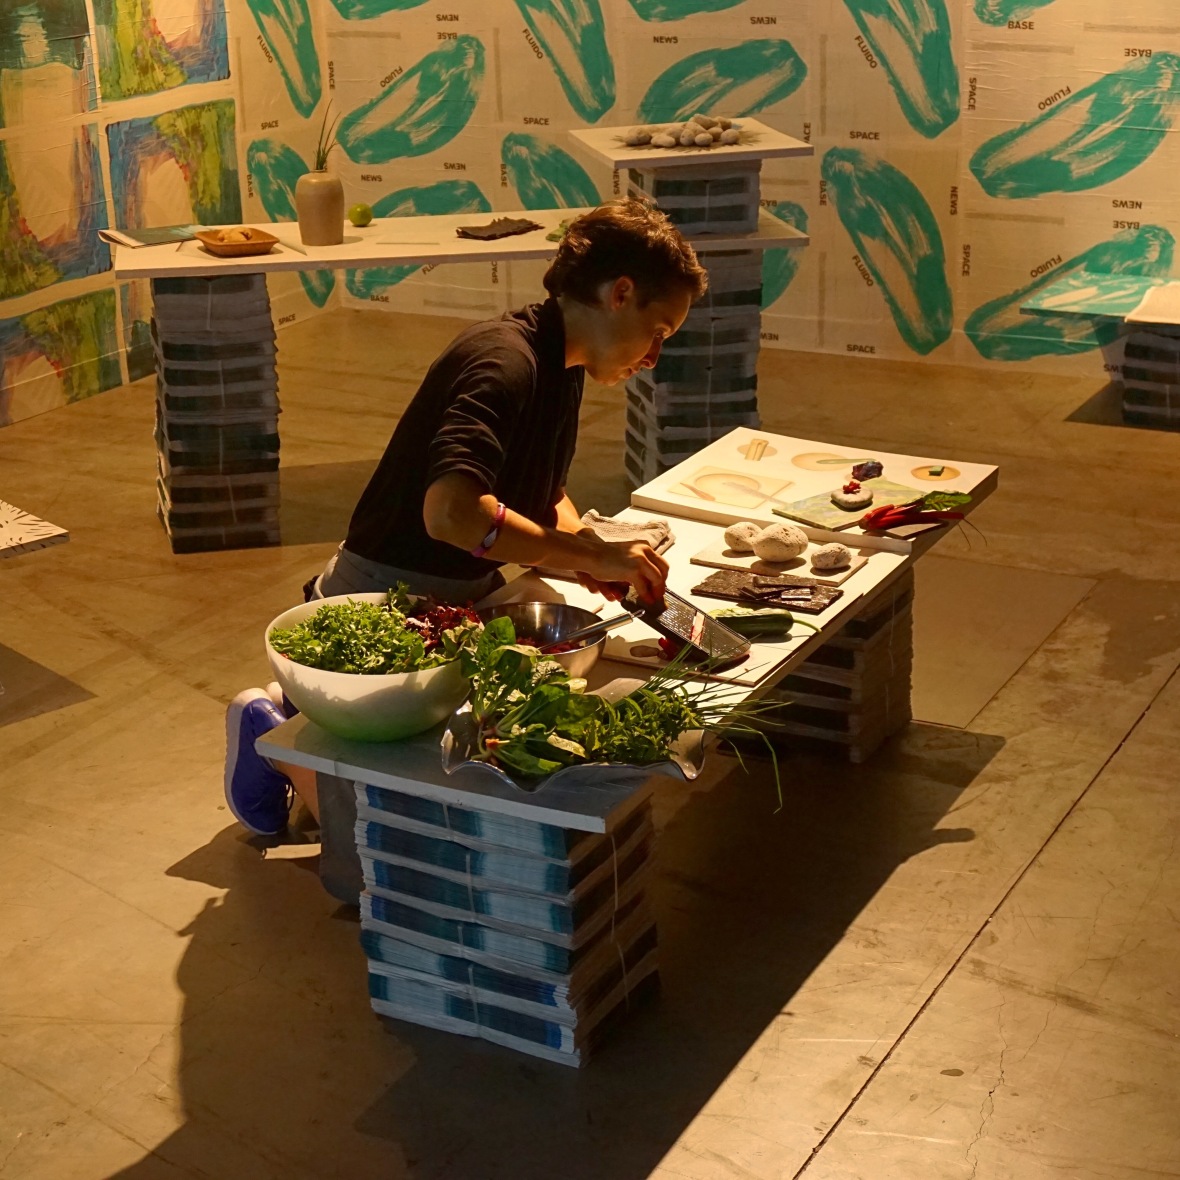 Sibylle Stoeckli's food-based performance piece is part of Artsy's collaboration with Design Miami/ Basel, in their Design Curio strand.